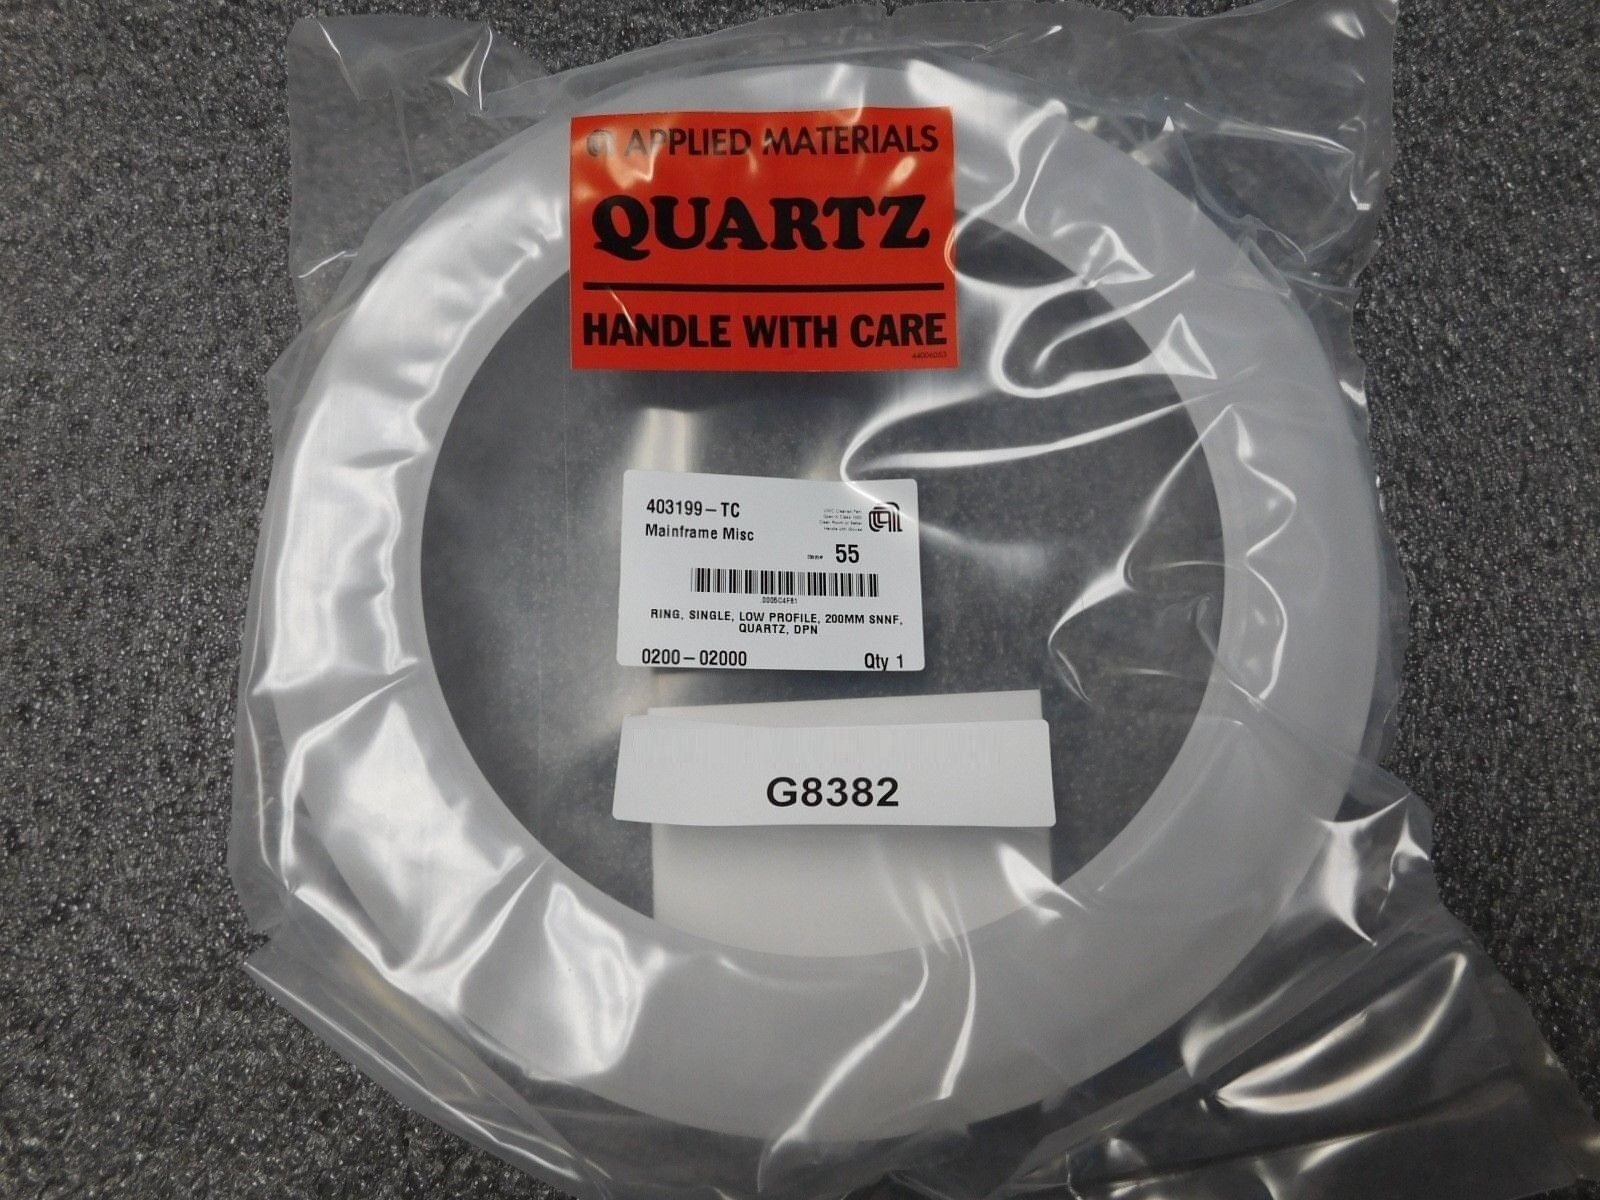 AMAT Applied Materials 0200-02000 Ring, Single Low Profile 200mm New